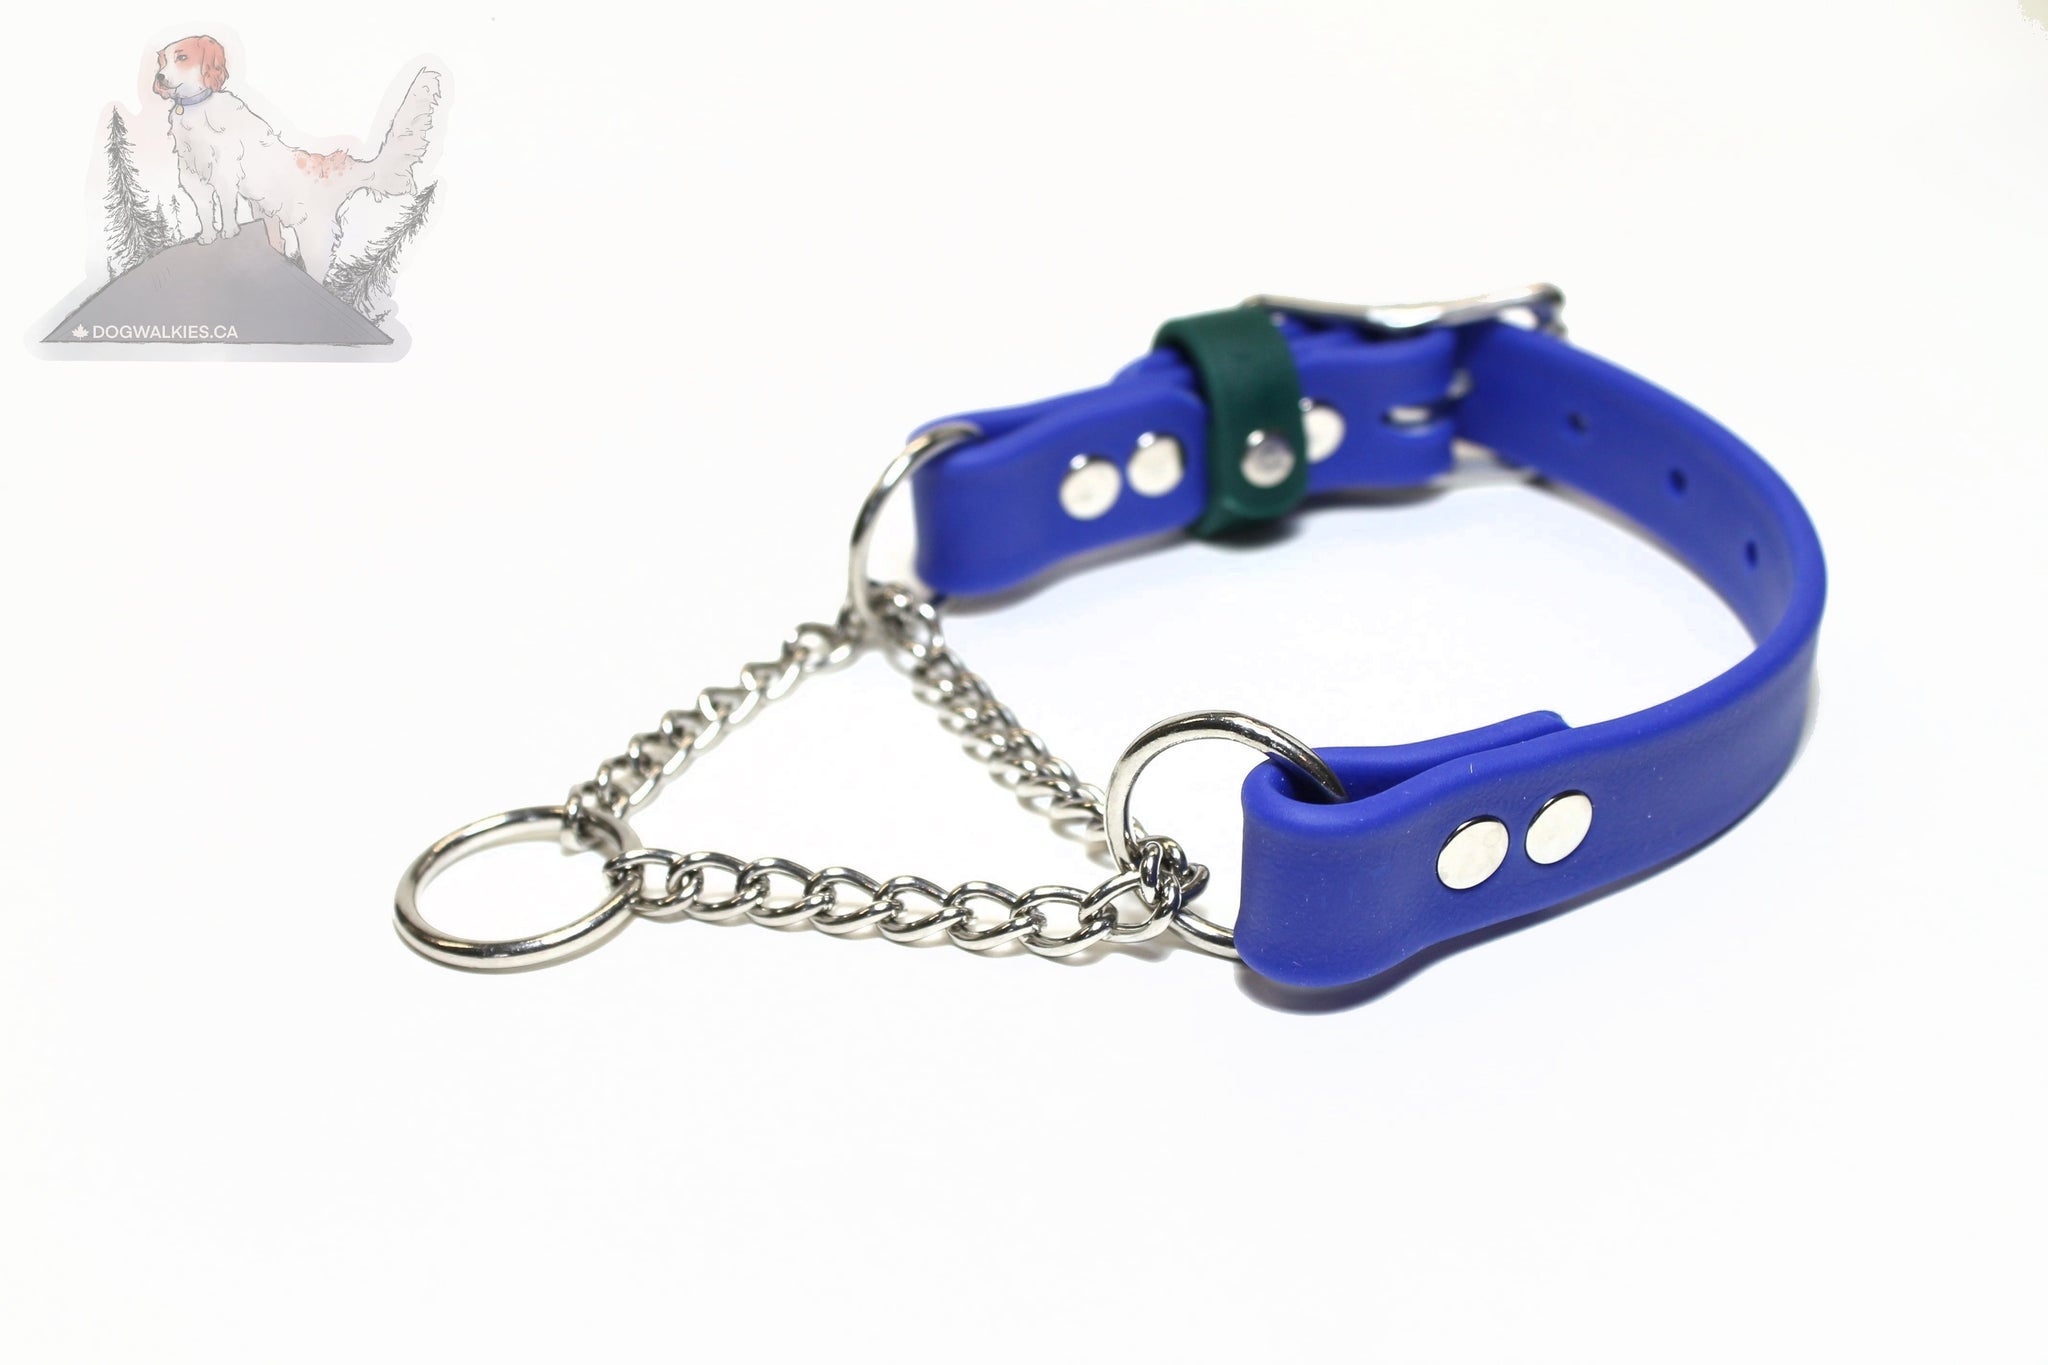 *NEW width- 3/4" (20mm) Chain Martingale Dog Collar in Biothane - 35 colour choices